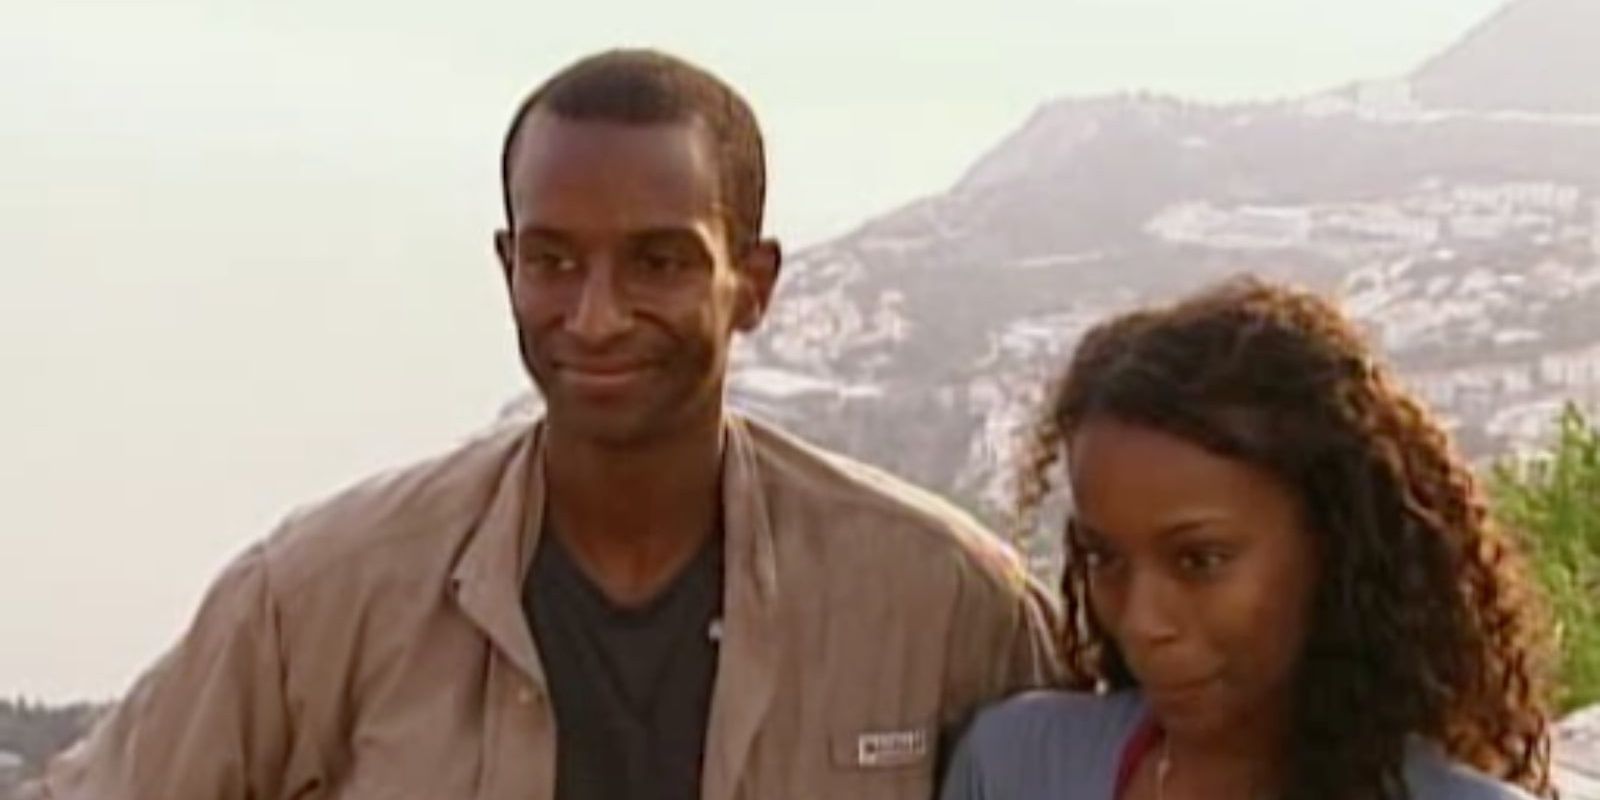 Azaria and Hendekea being eliminated from The Amazing Race